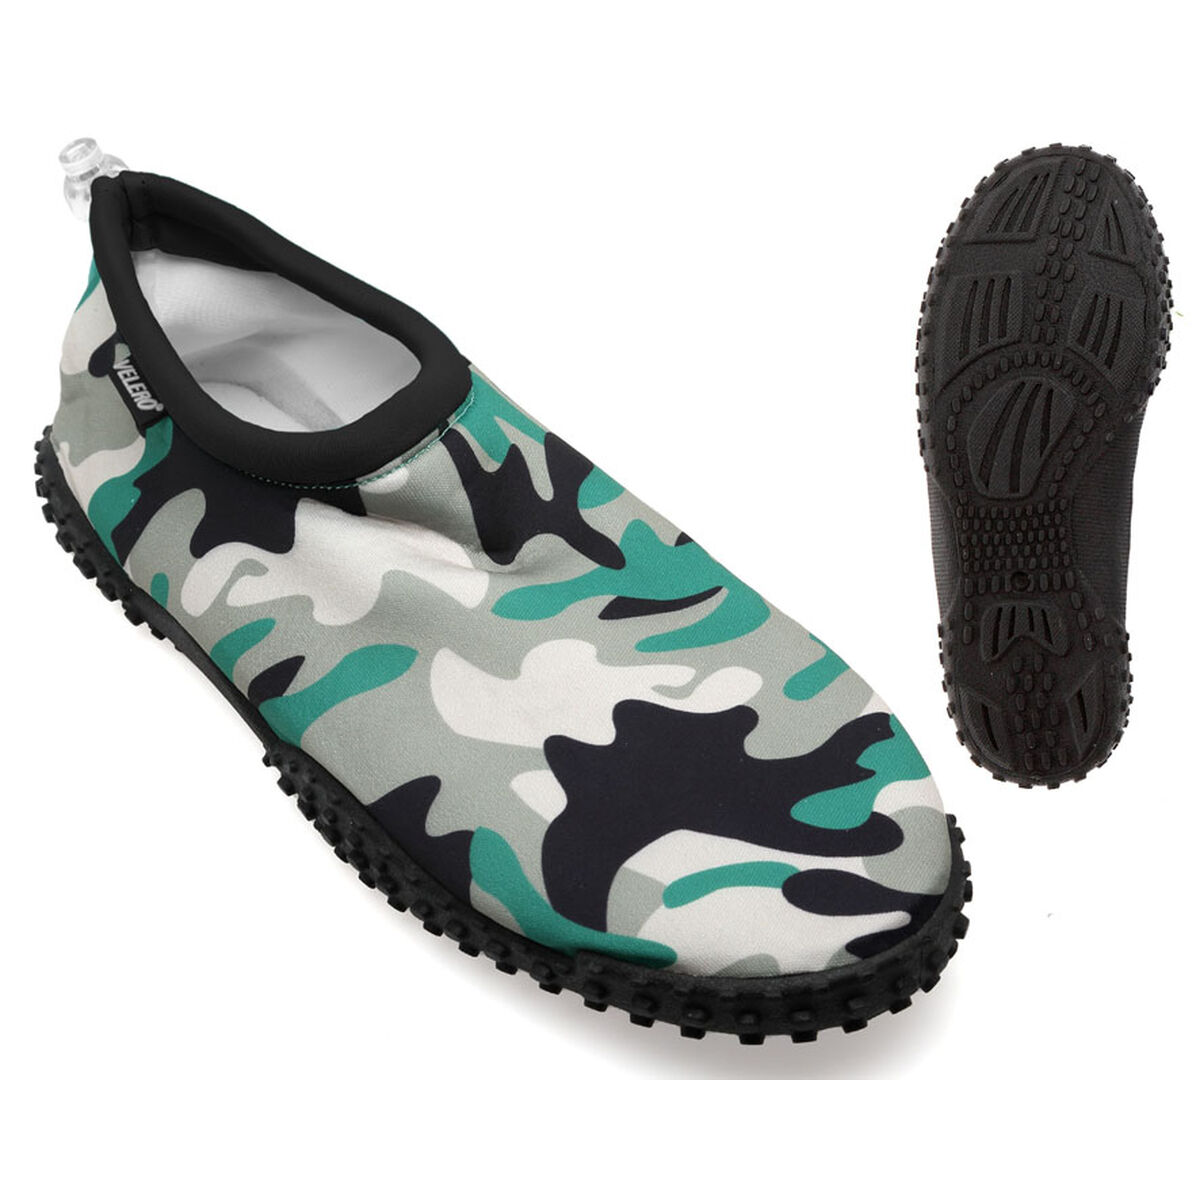 Chaussons Camouflage Adultes unisexes